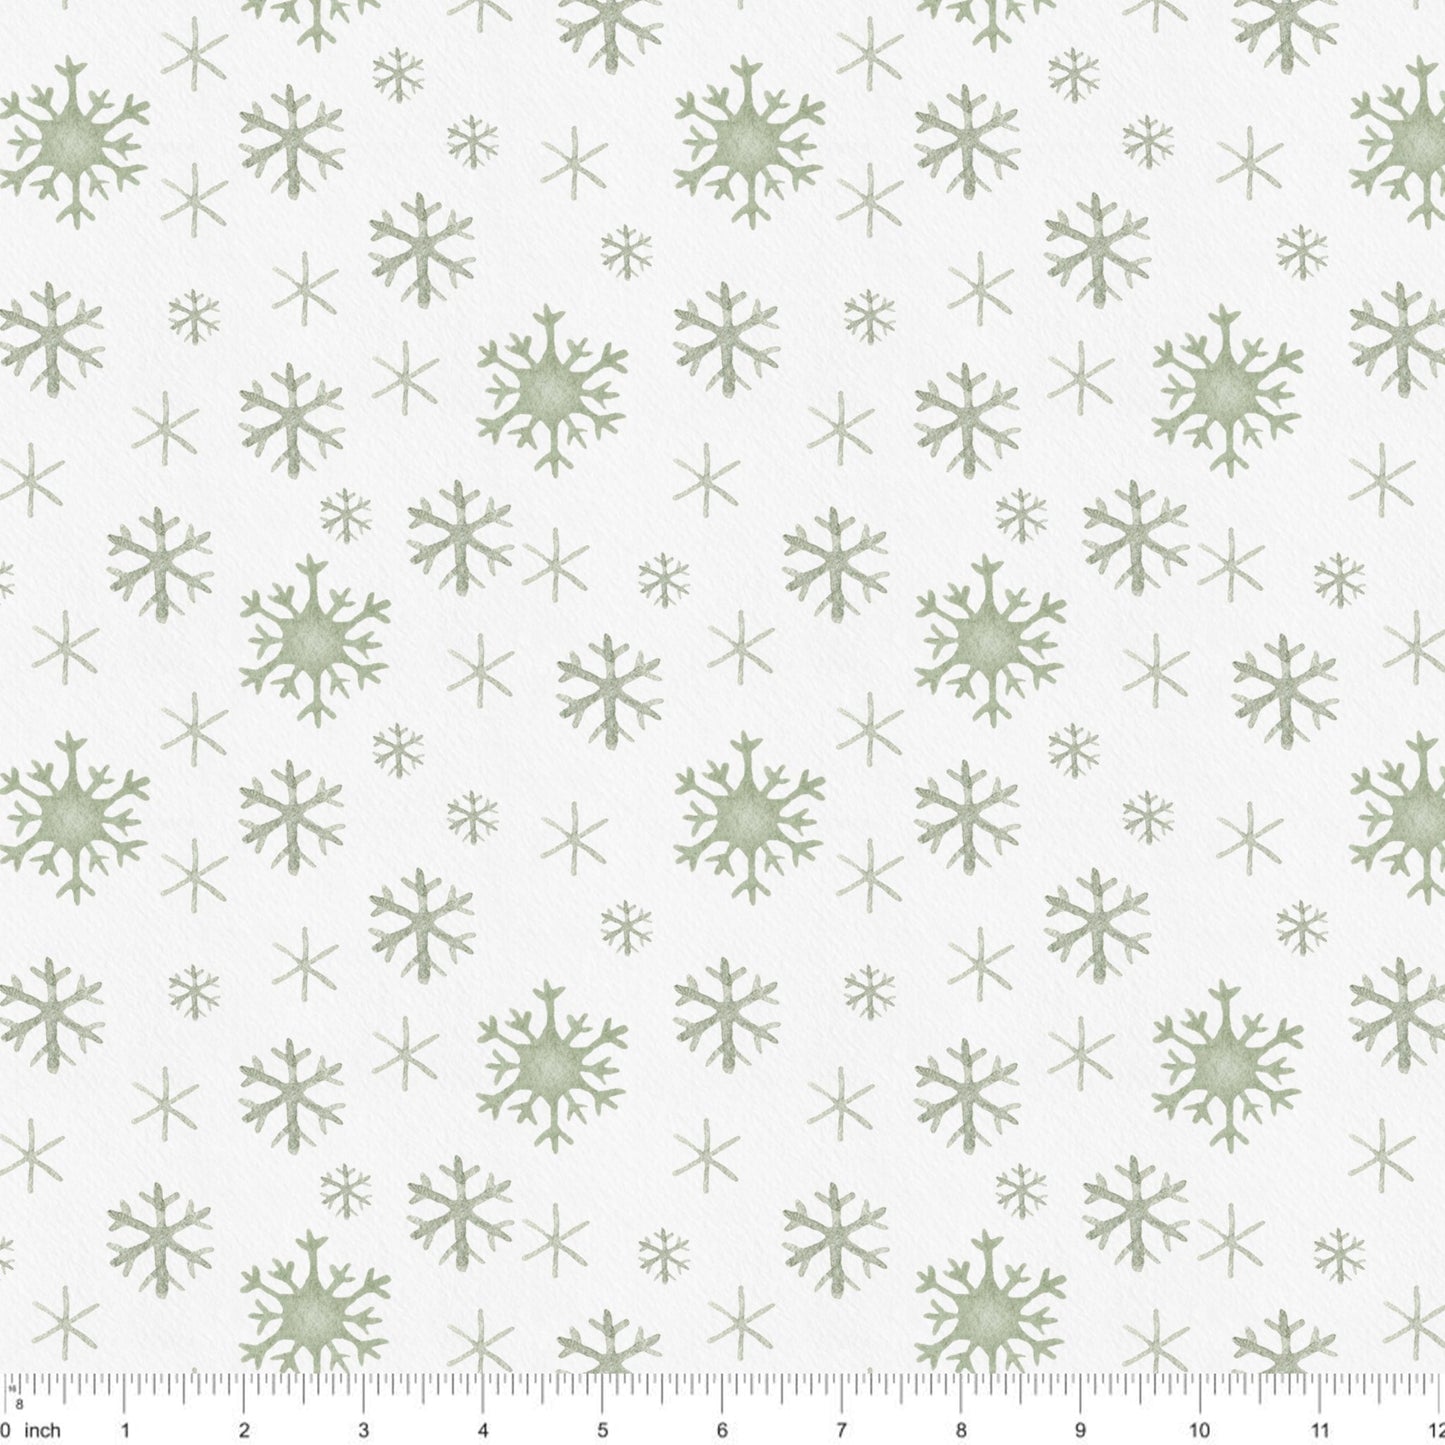 Snowflakes - Grey on White - Winter Owl Coordinate - Little Rhody Sewing Co.